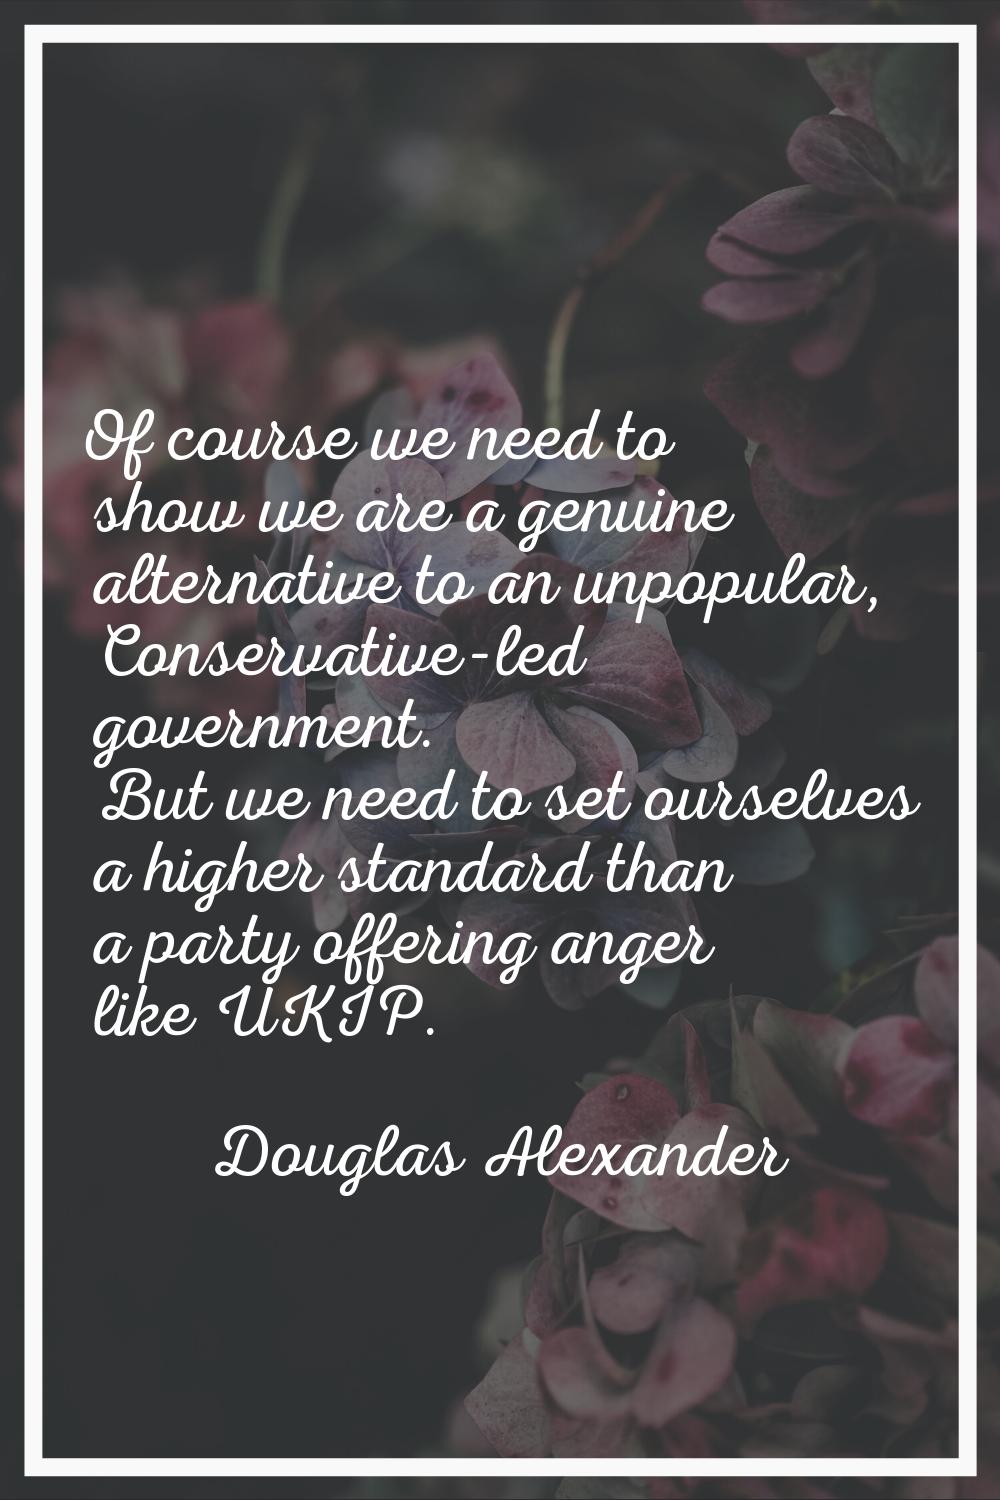 Of course we need to show we are a genuine alternative to an unpopular, Conservative-led government